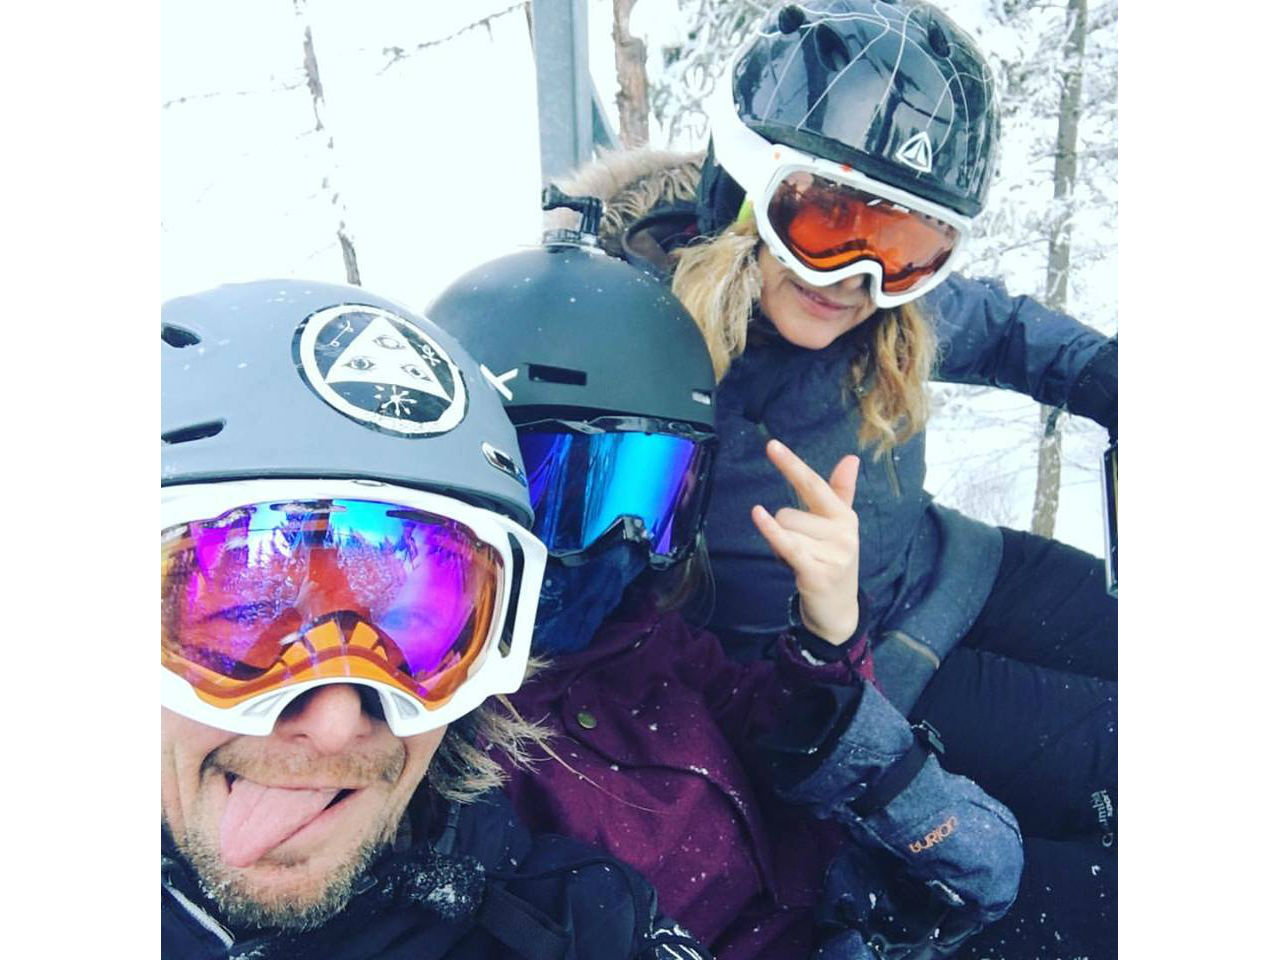 a family on a snowboard lift